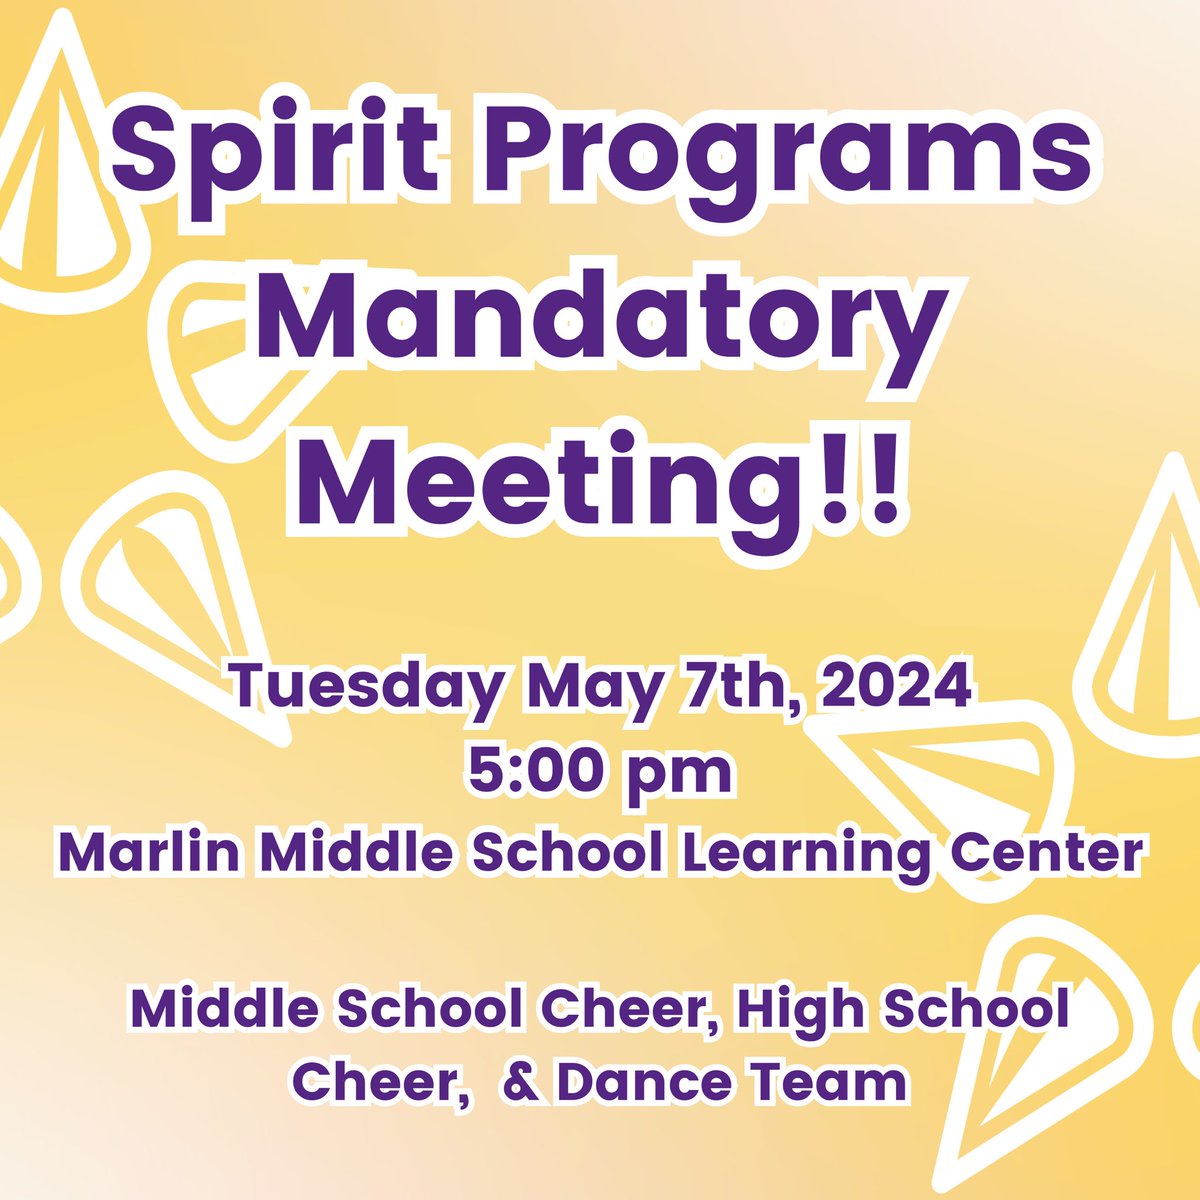 Please mark it in your calendars we will have a MANDATORY Spirit Programs meeting May 7th at 5 pm in the MMS learning center to discuss next year. Parents please be in attendance! See you there!💜